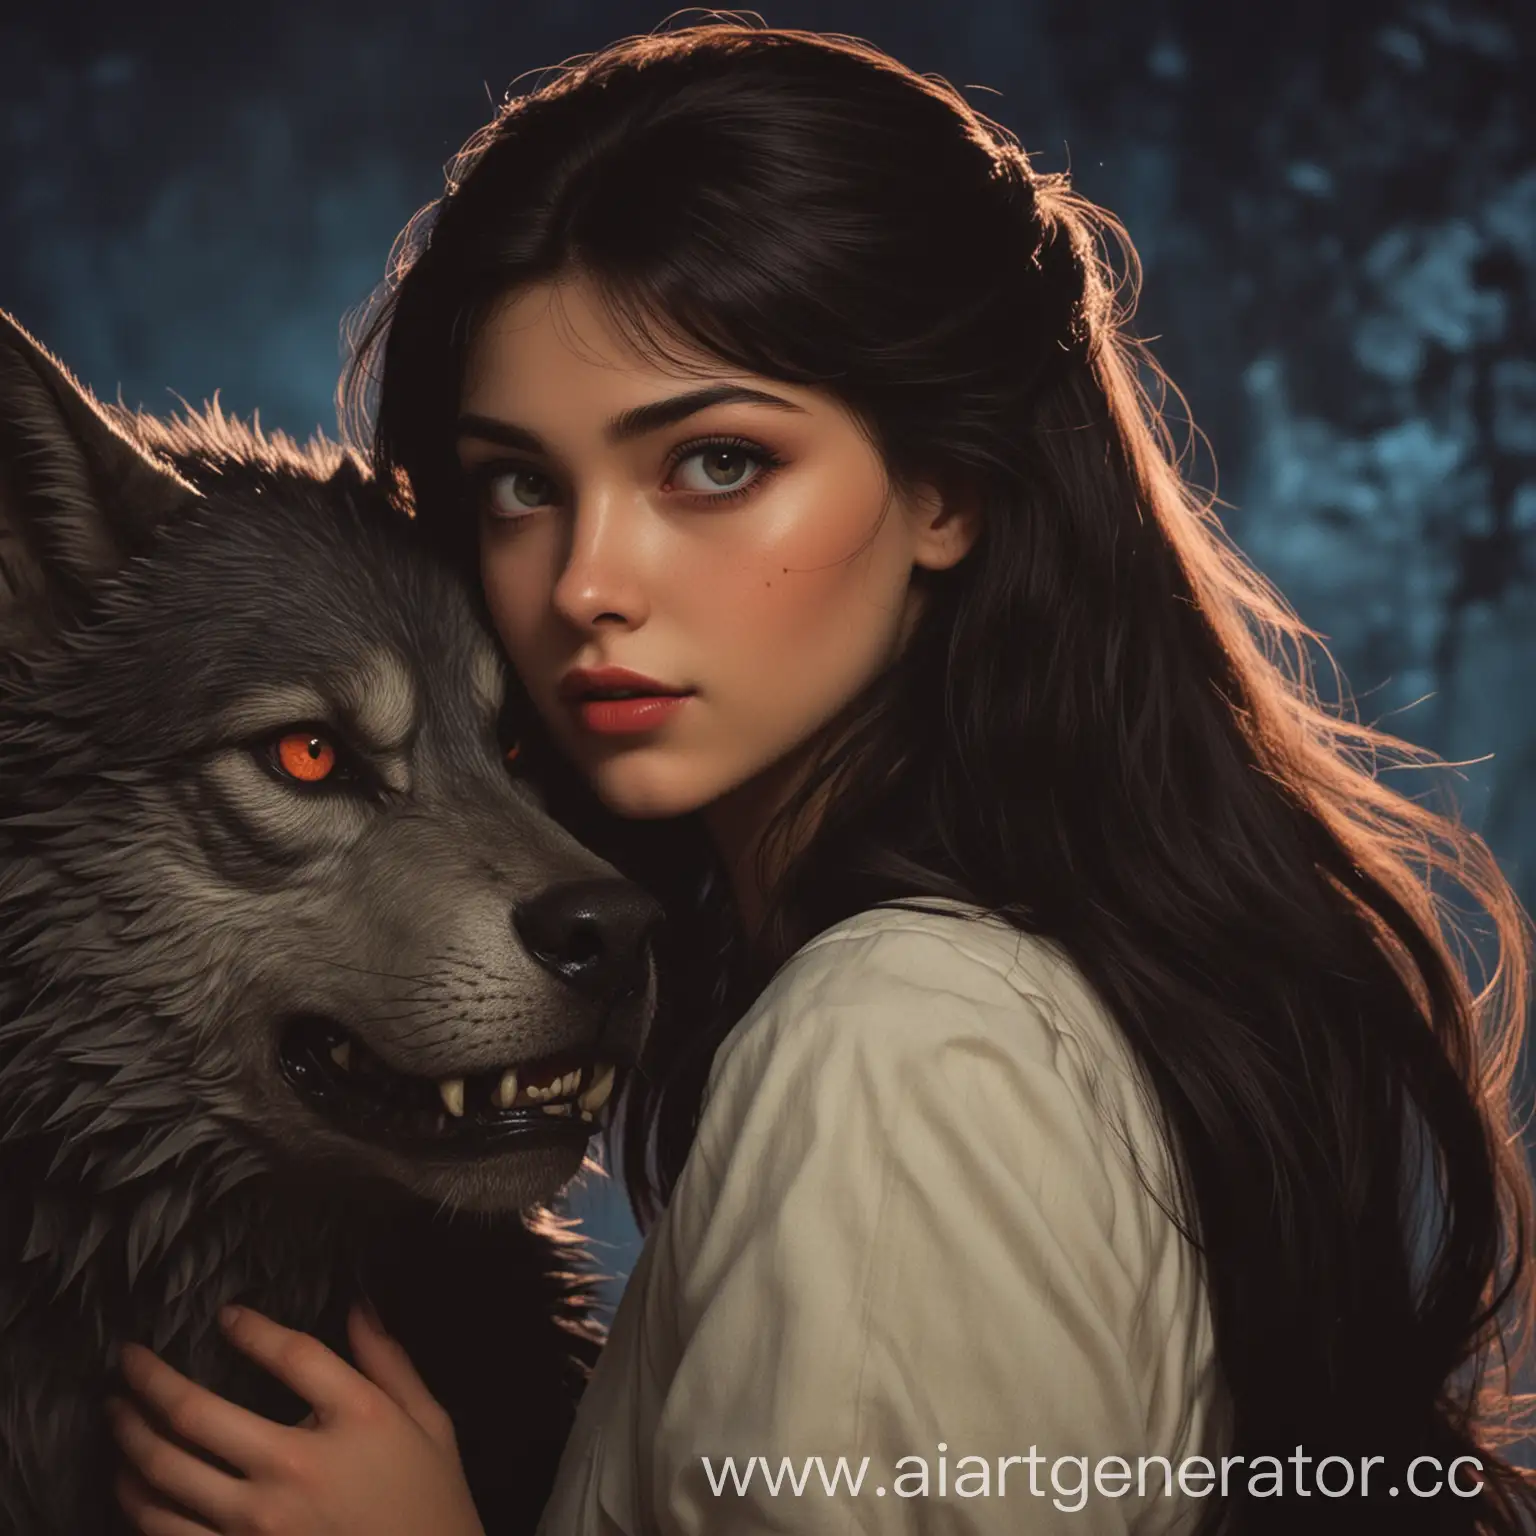 Affectionate-Girl-from-Another-World-with-Handsome-HumanWerewolf